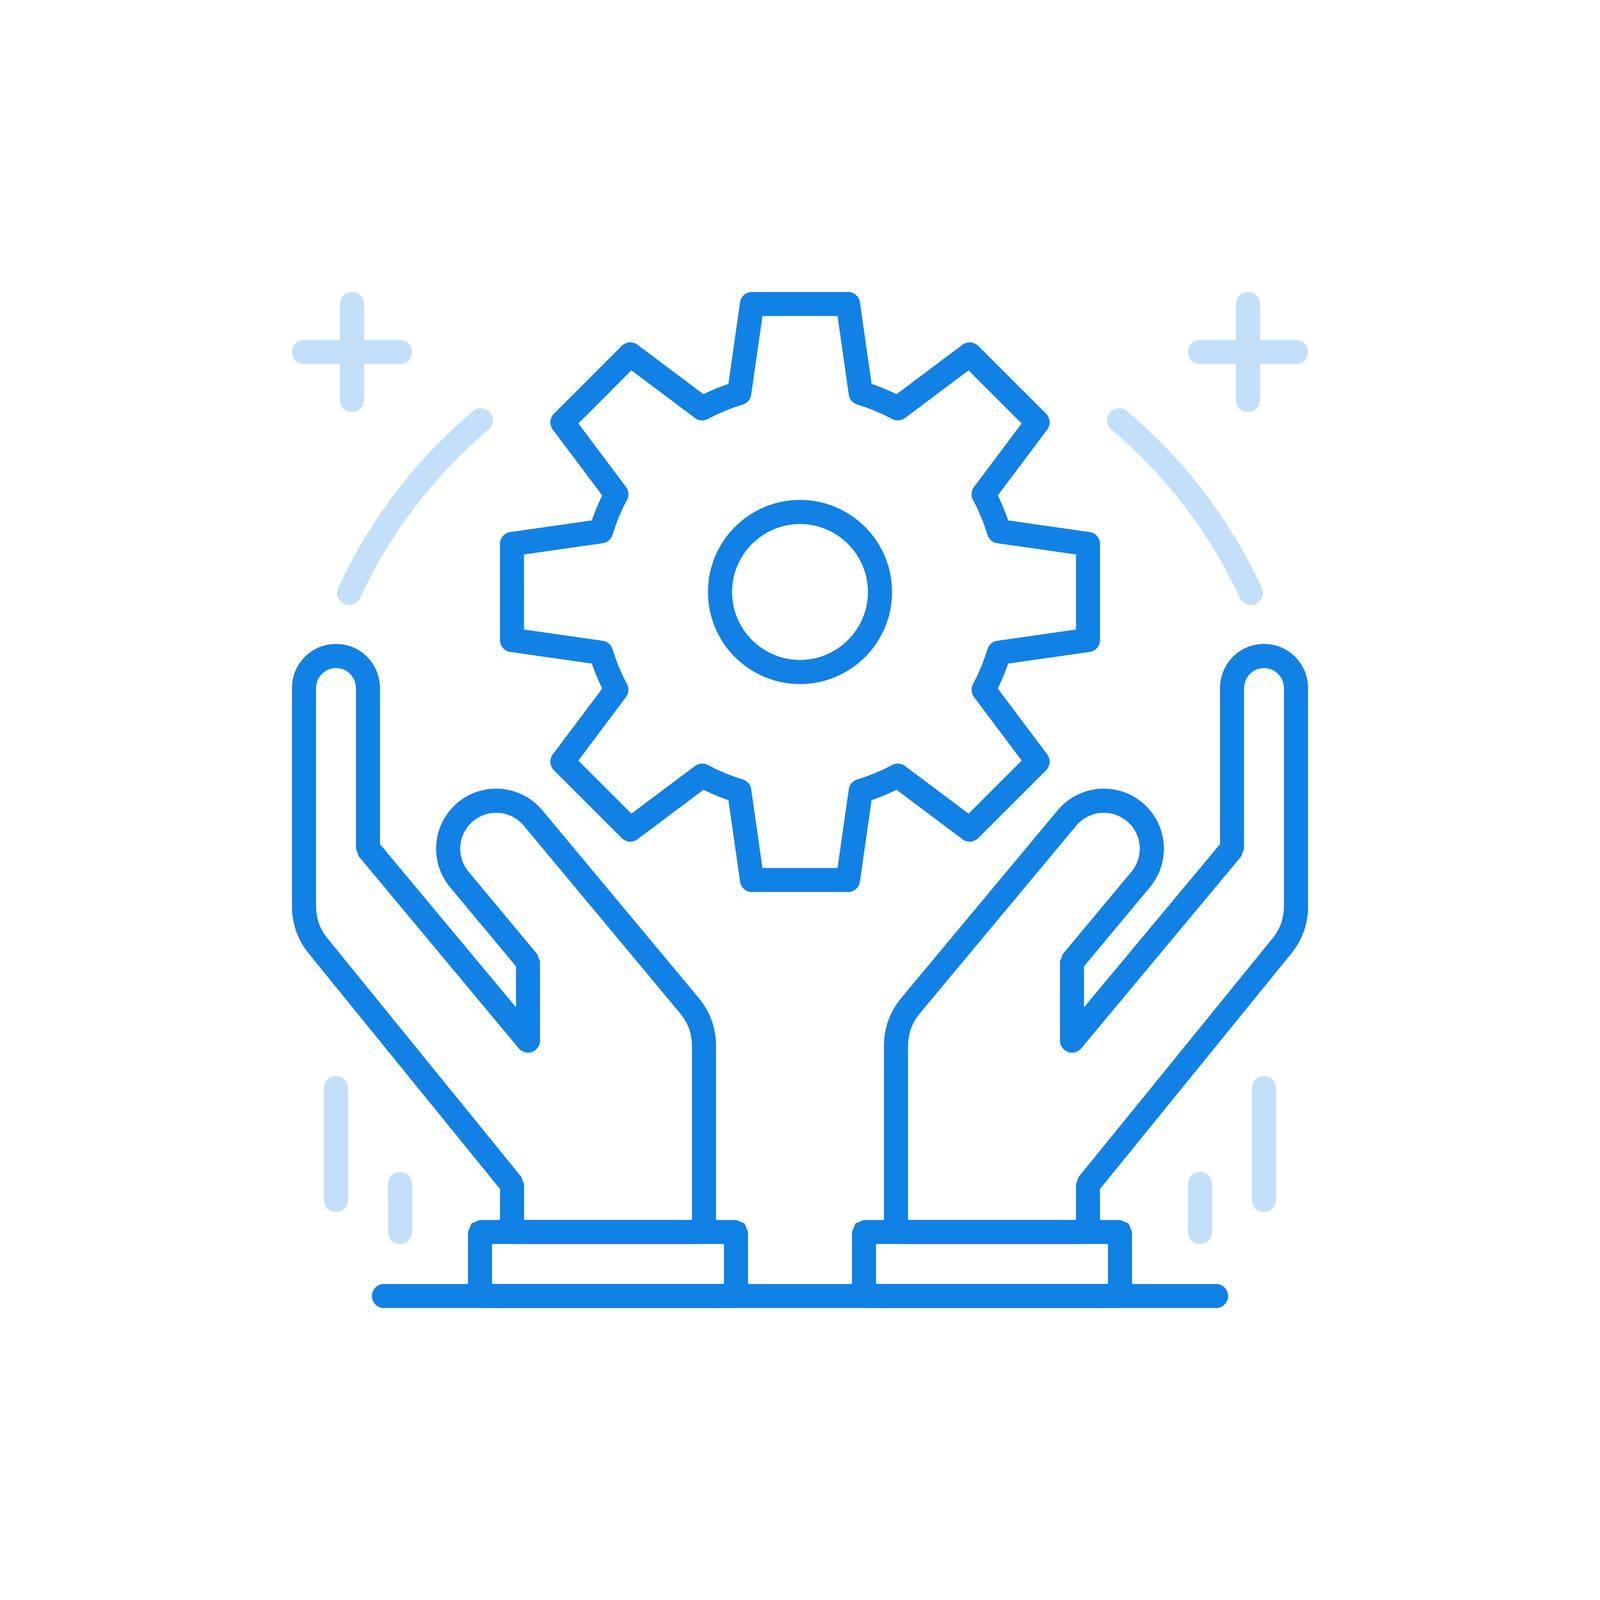 Creative optimization vector line icon. New technology growth developments and business management. Hands raising gear. Online research communication and marketing analytics engine.